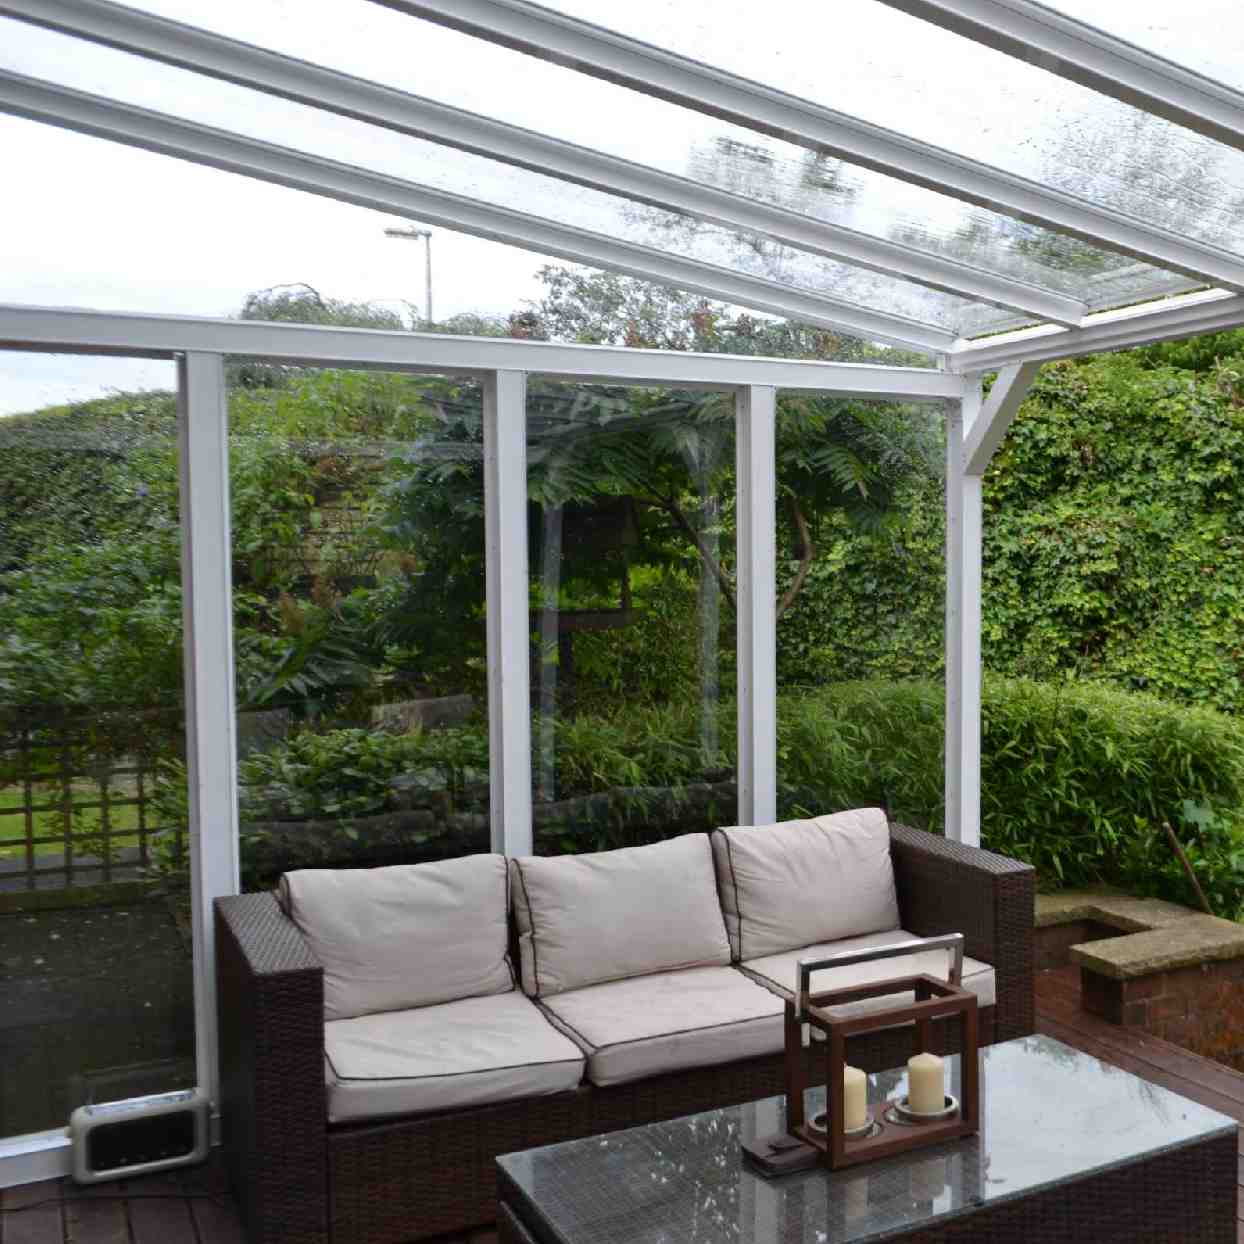 Buy Omega Verandah White with 16mm Polycarbonate Glazing - 9.5m (W) x 1.5m (P), (5) Supporting Posts online today